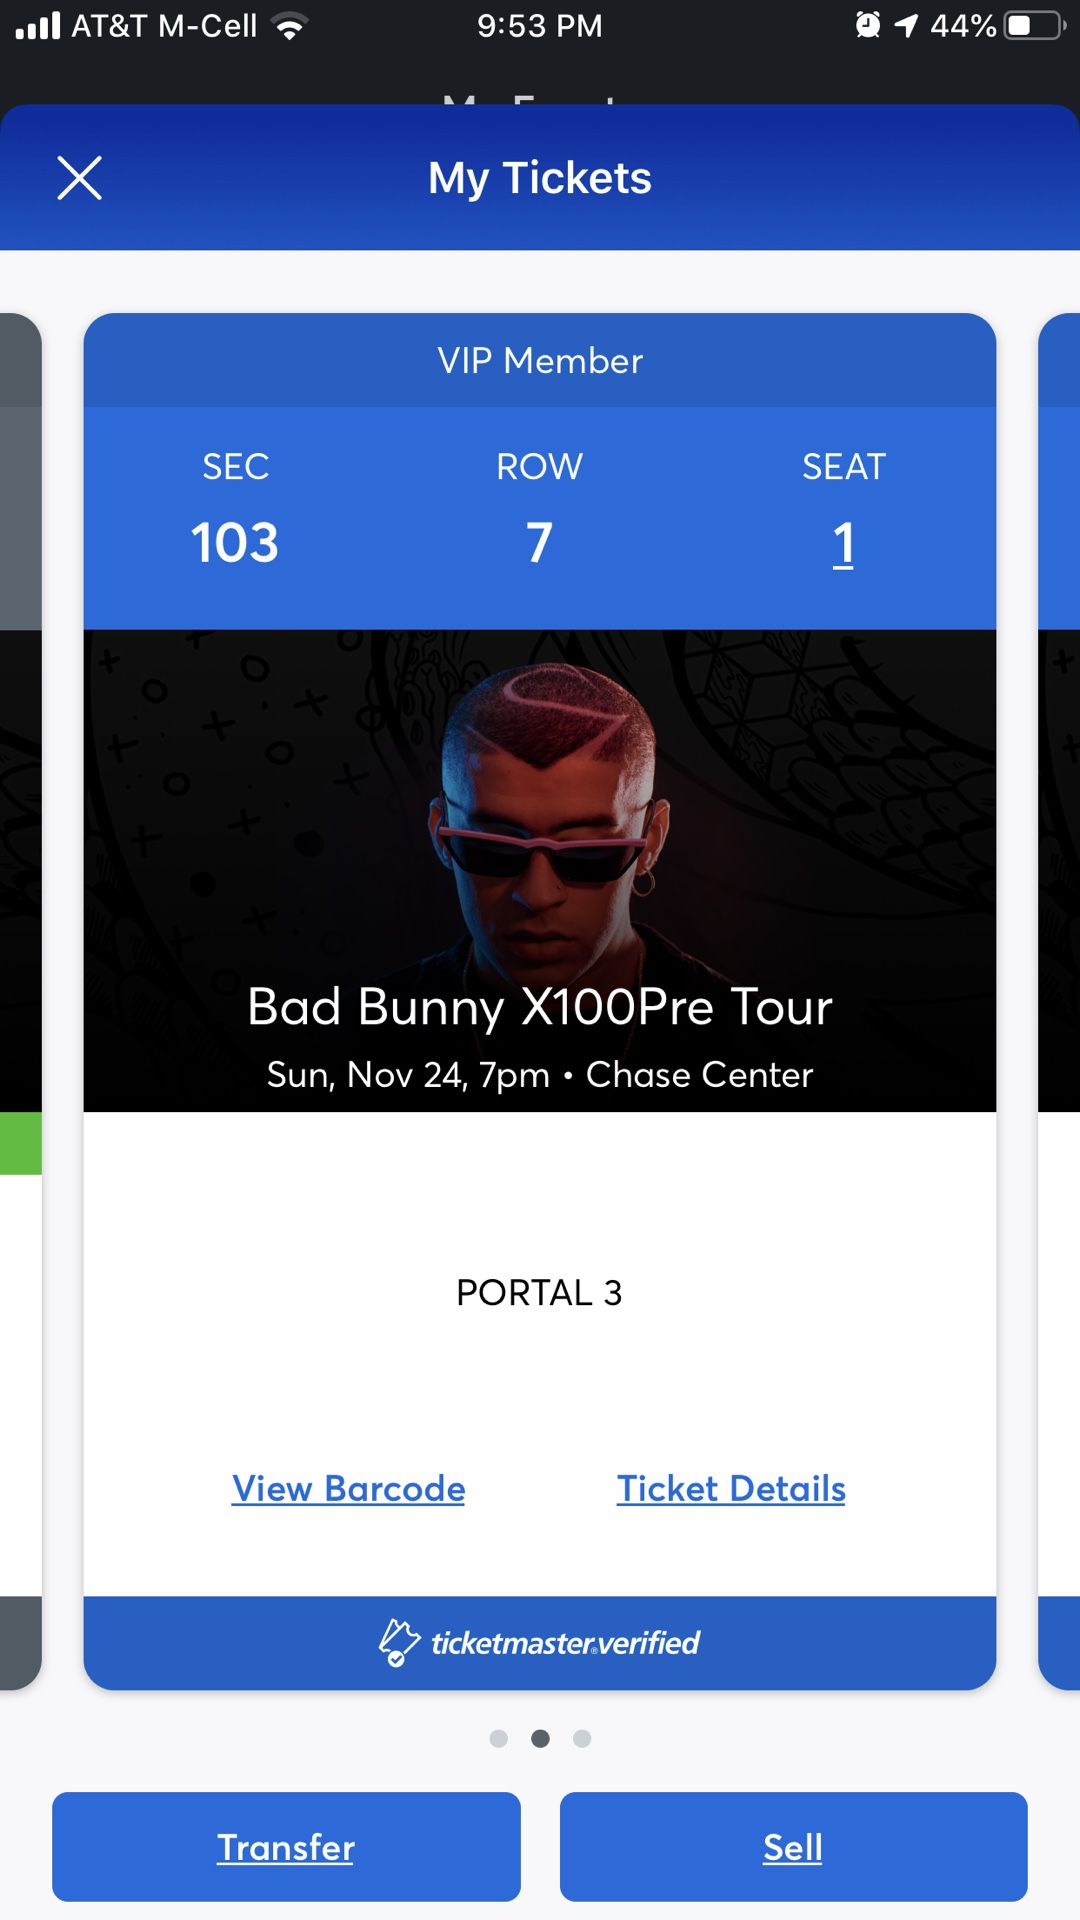 Bad Bunny @ Chase Center